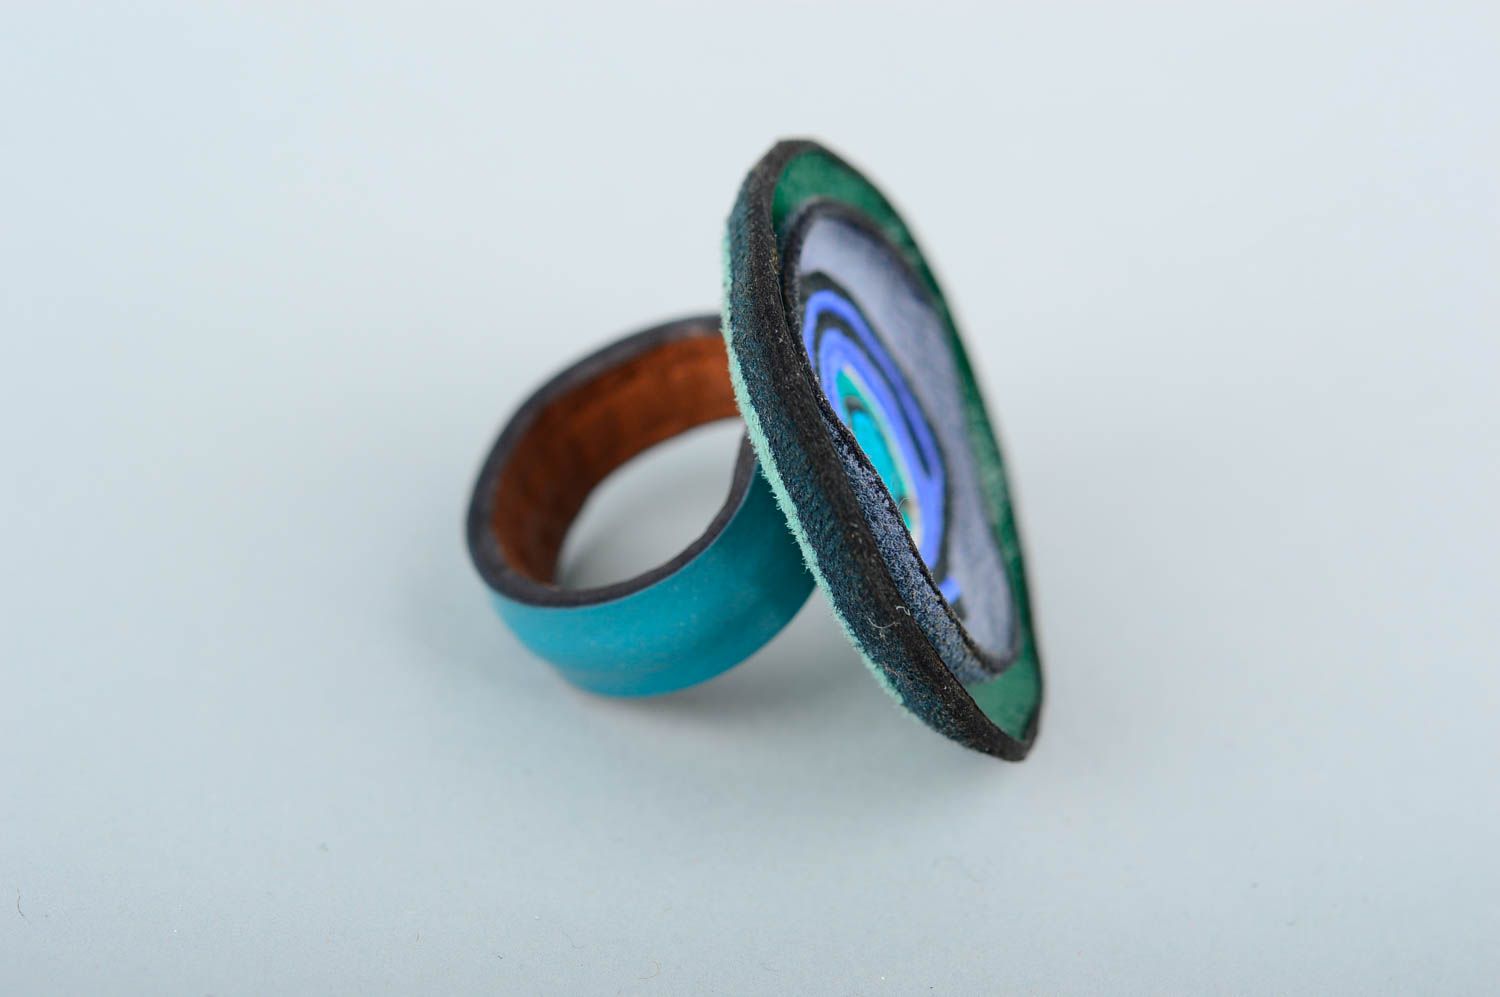 Handmade leather accessory handmade leather ring unusual leather ring for women photo 2